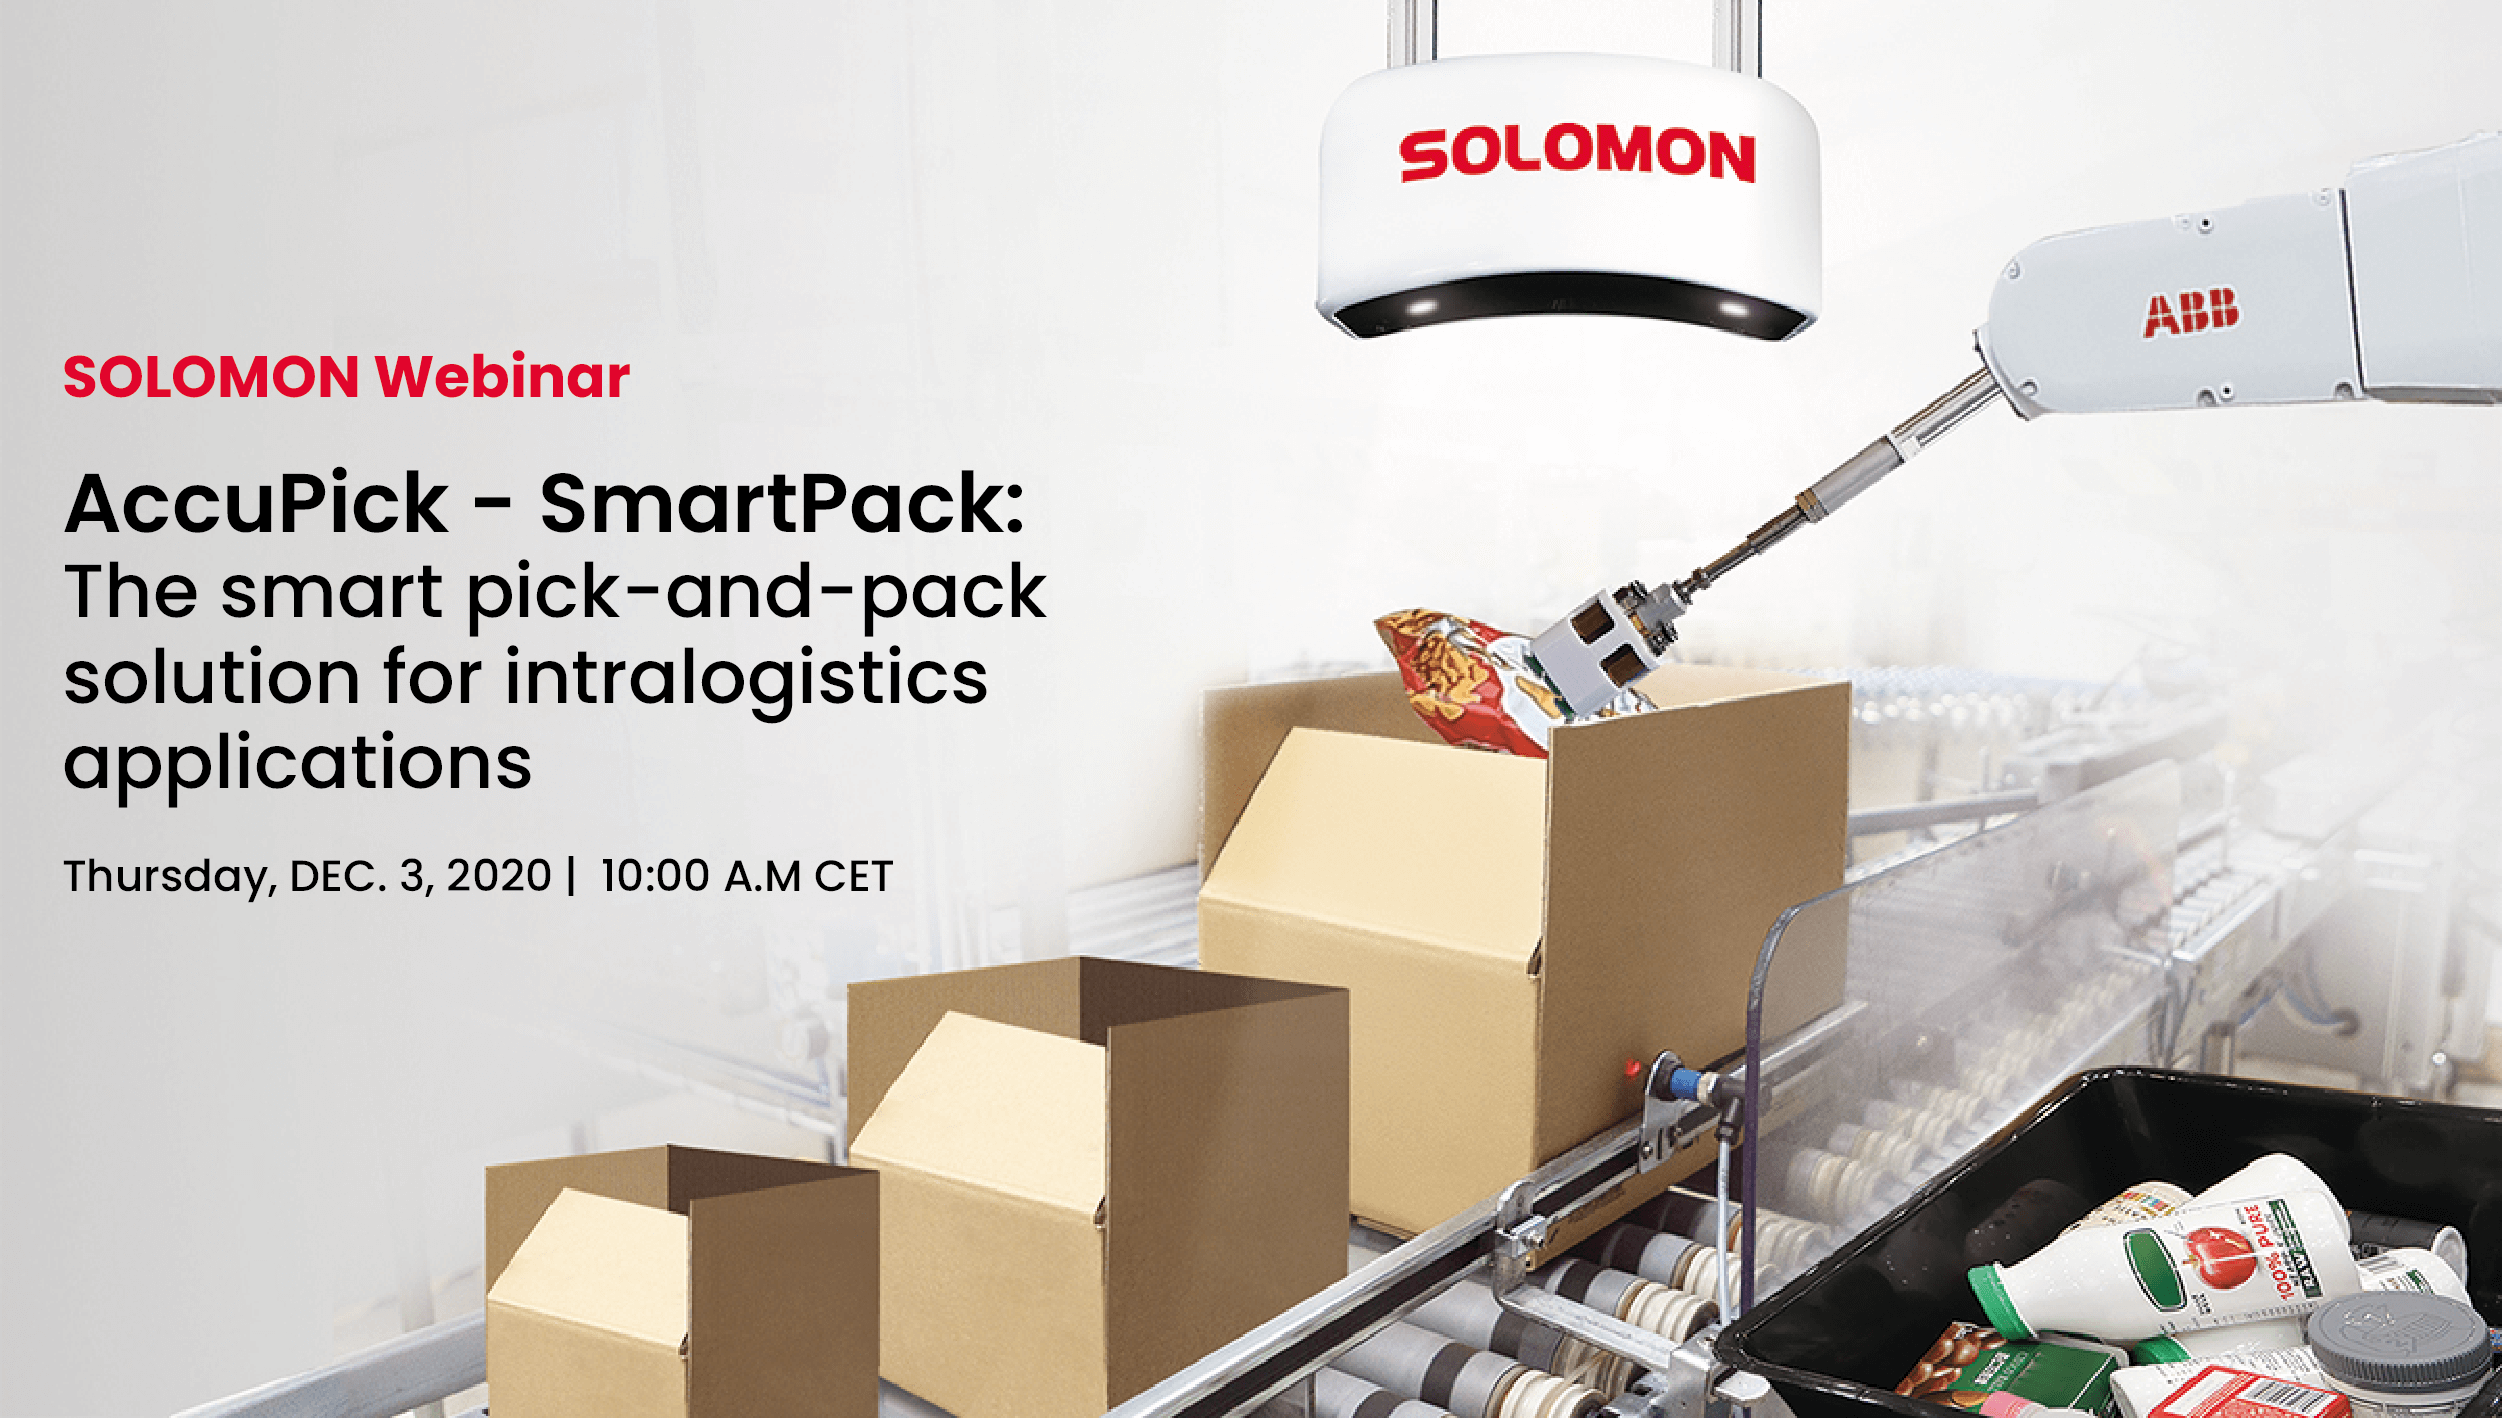 AccuPick – SmartPack: The smart pick-and-pack solution for intralogistics applications